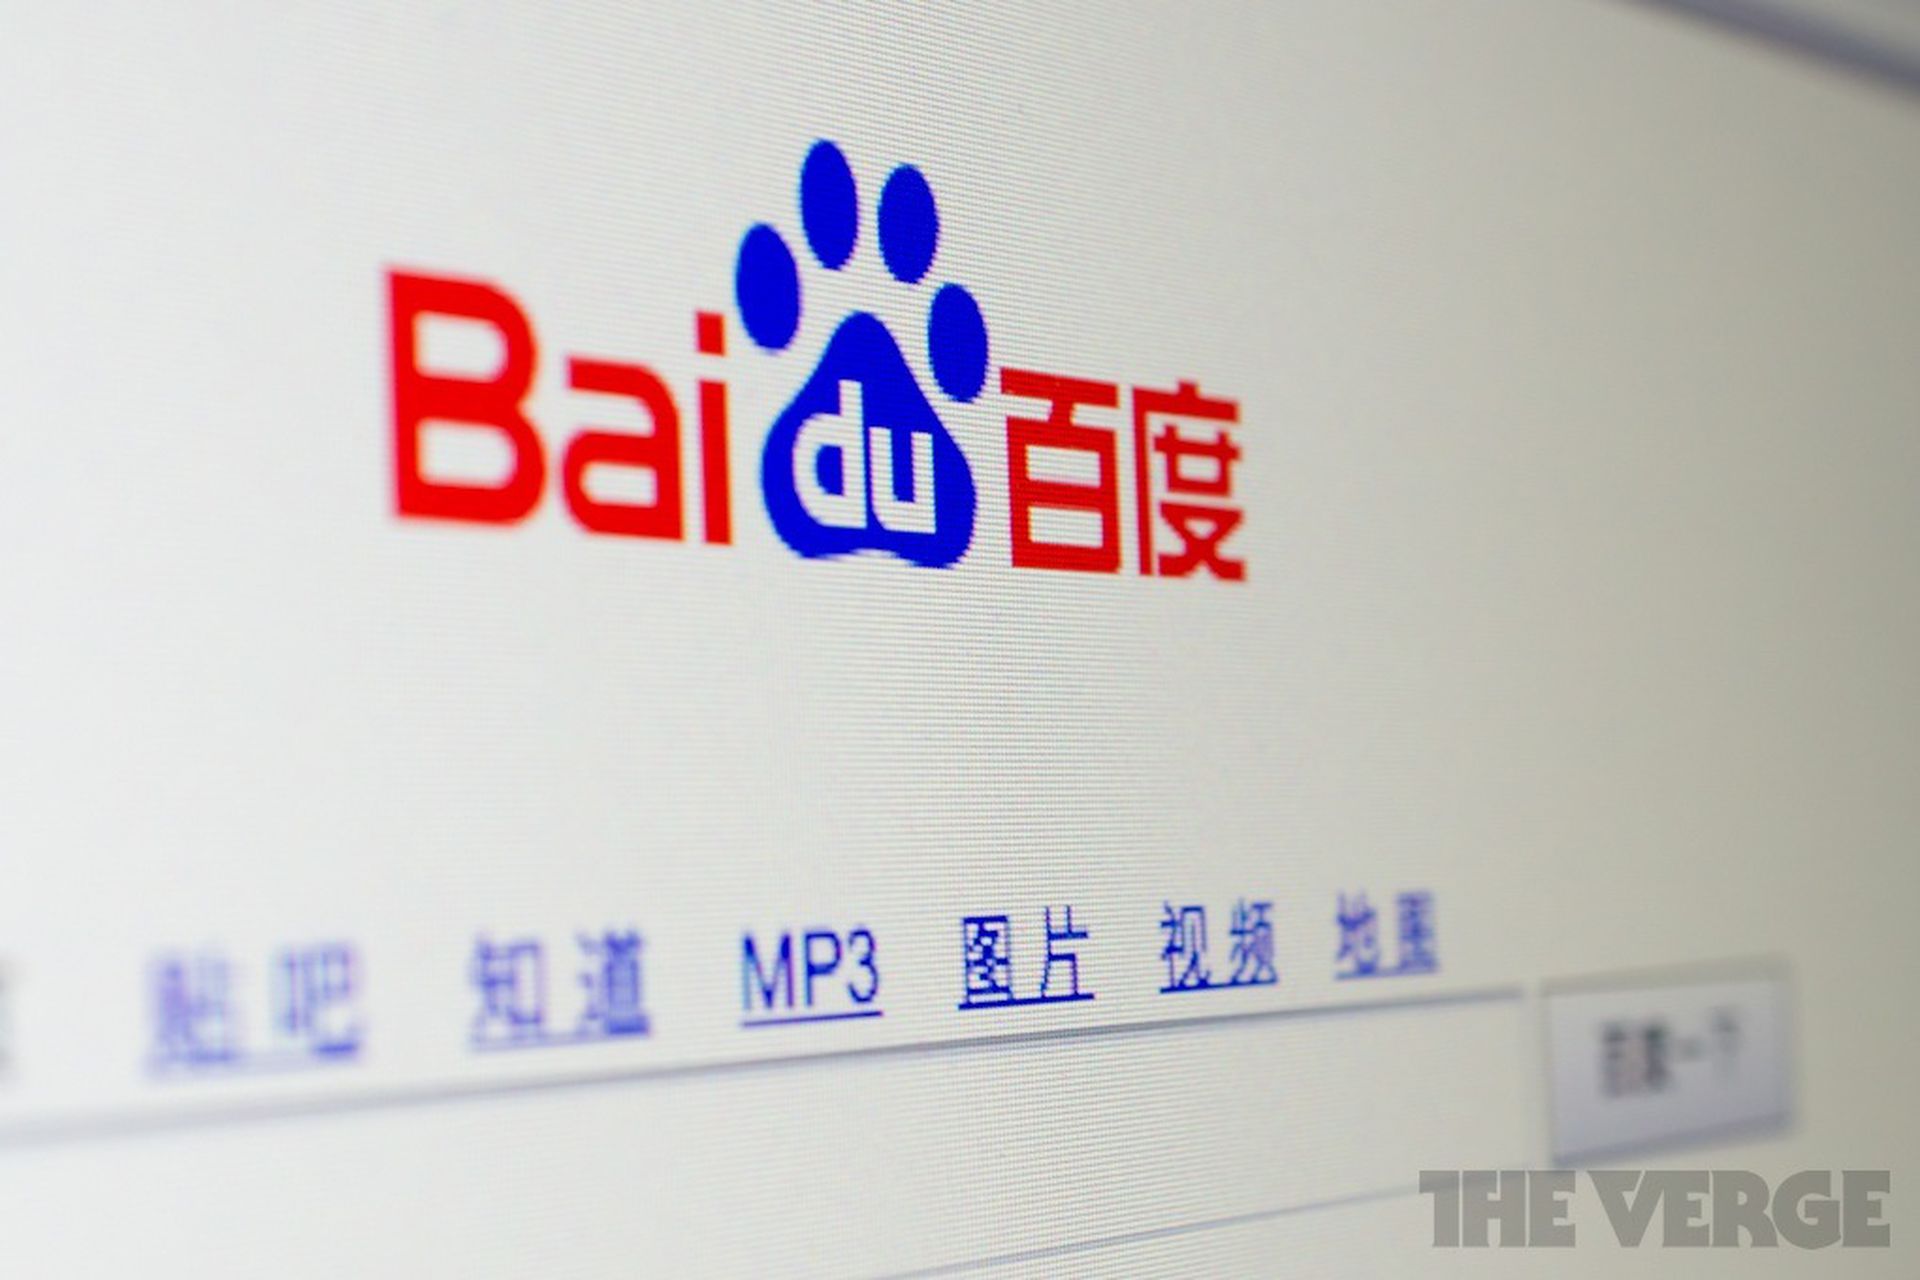 Baidu launches Ernie chatbot after Chinese government approval - The Verge